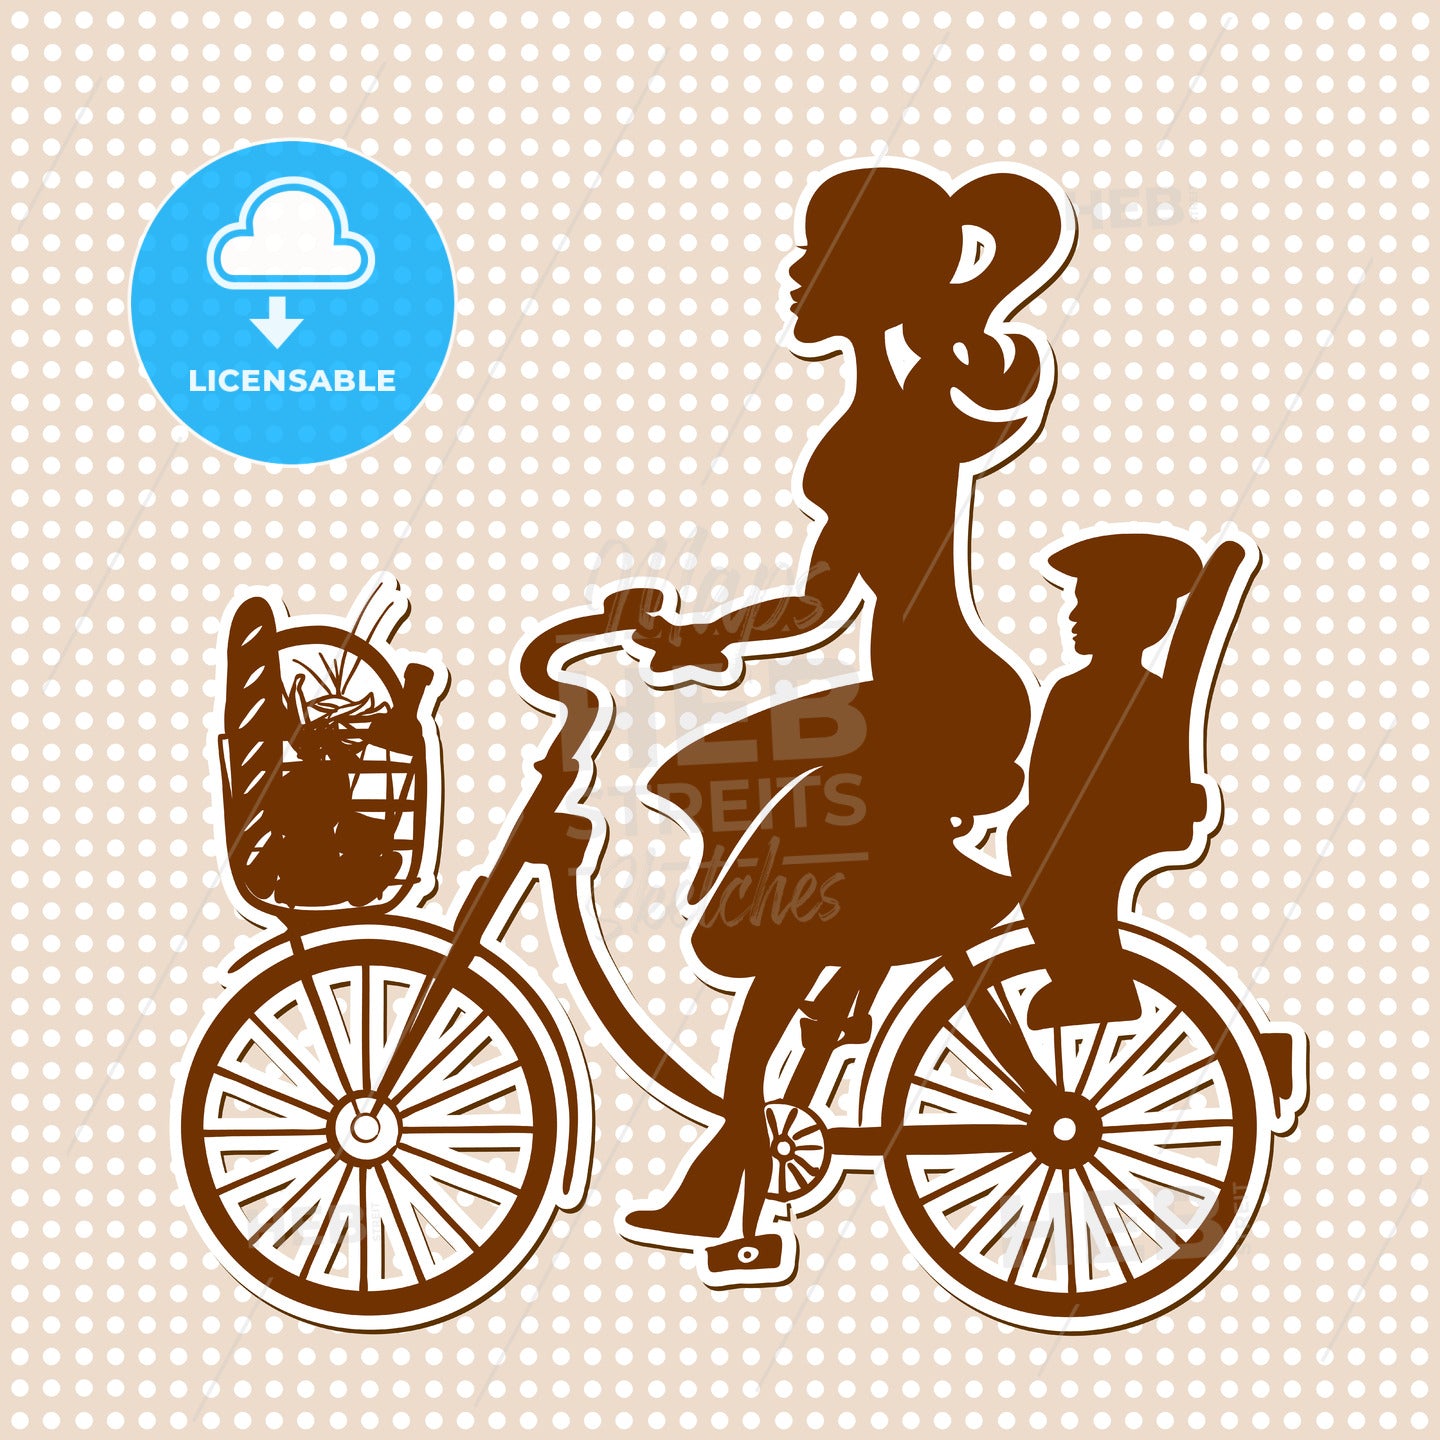 Vintage Retro Lady on Bike with Child and Purchase in Basket – instant download